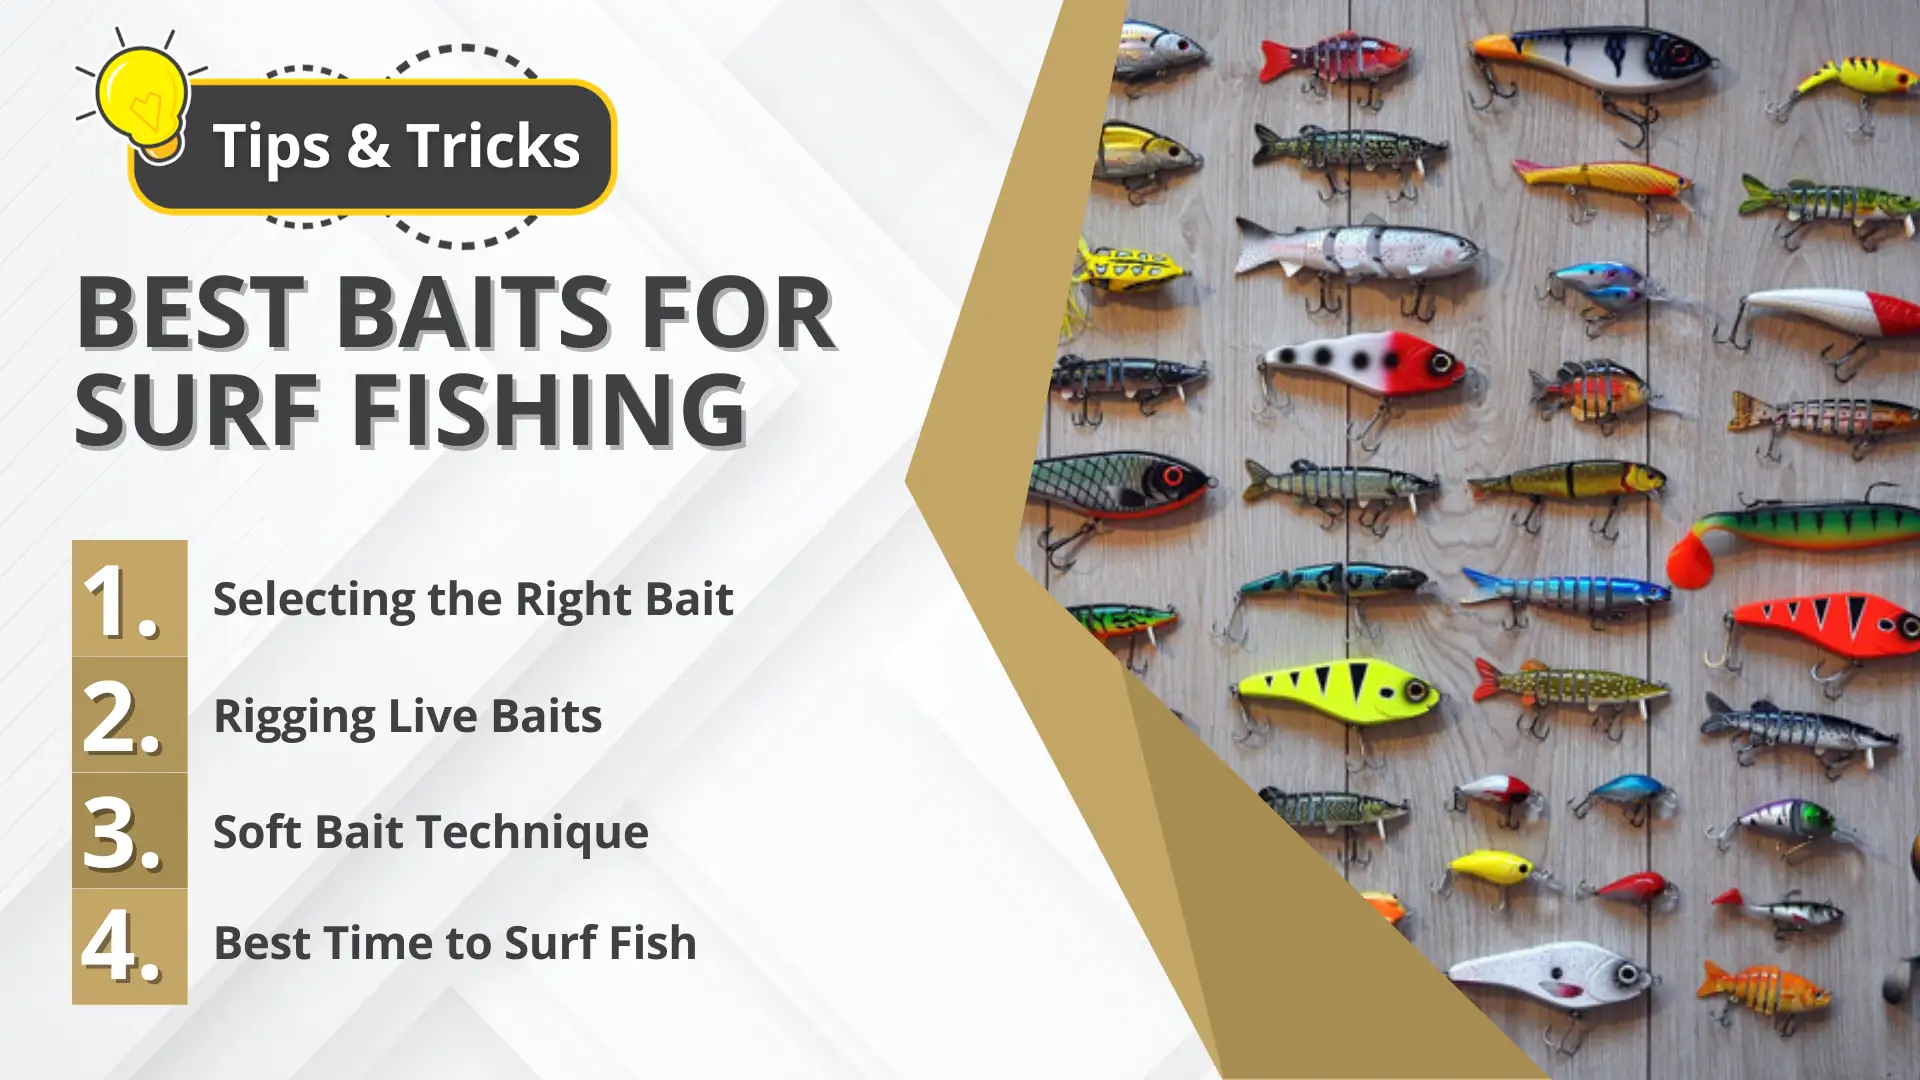 Best Baits for Surf Fishing